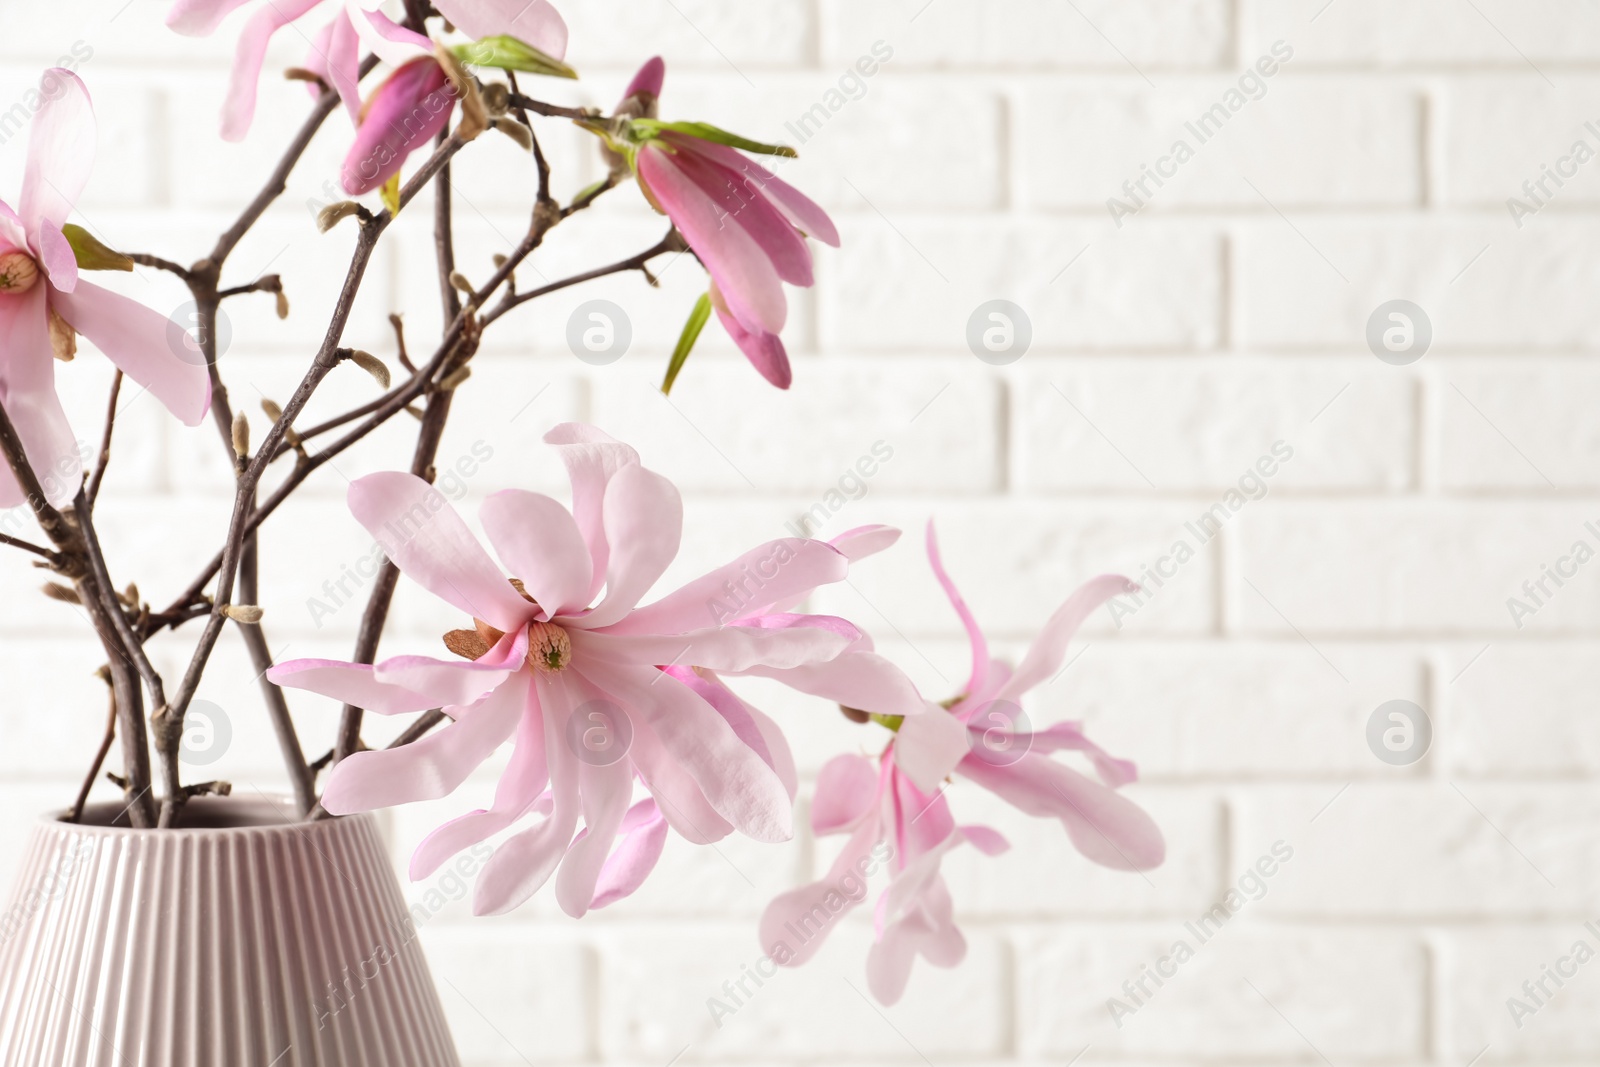 Photo of Magnolia tree branches with beautiful flowers in vase against white brick wall, closeup. Space for text